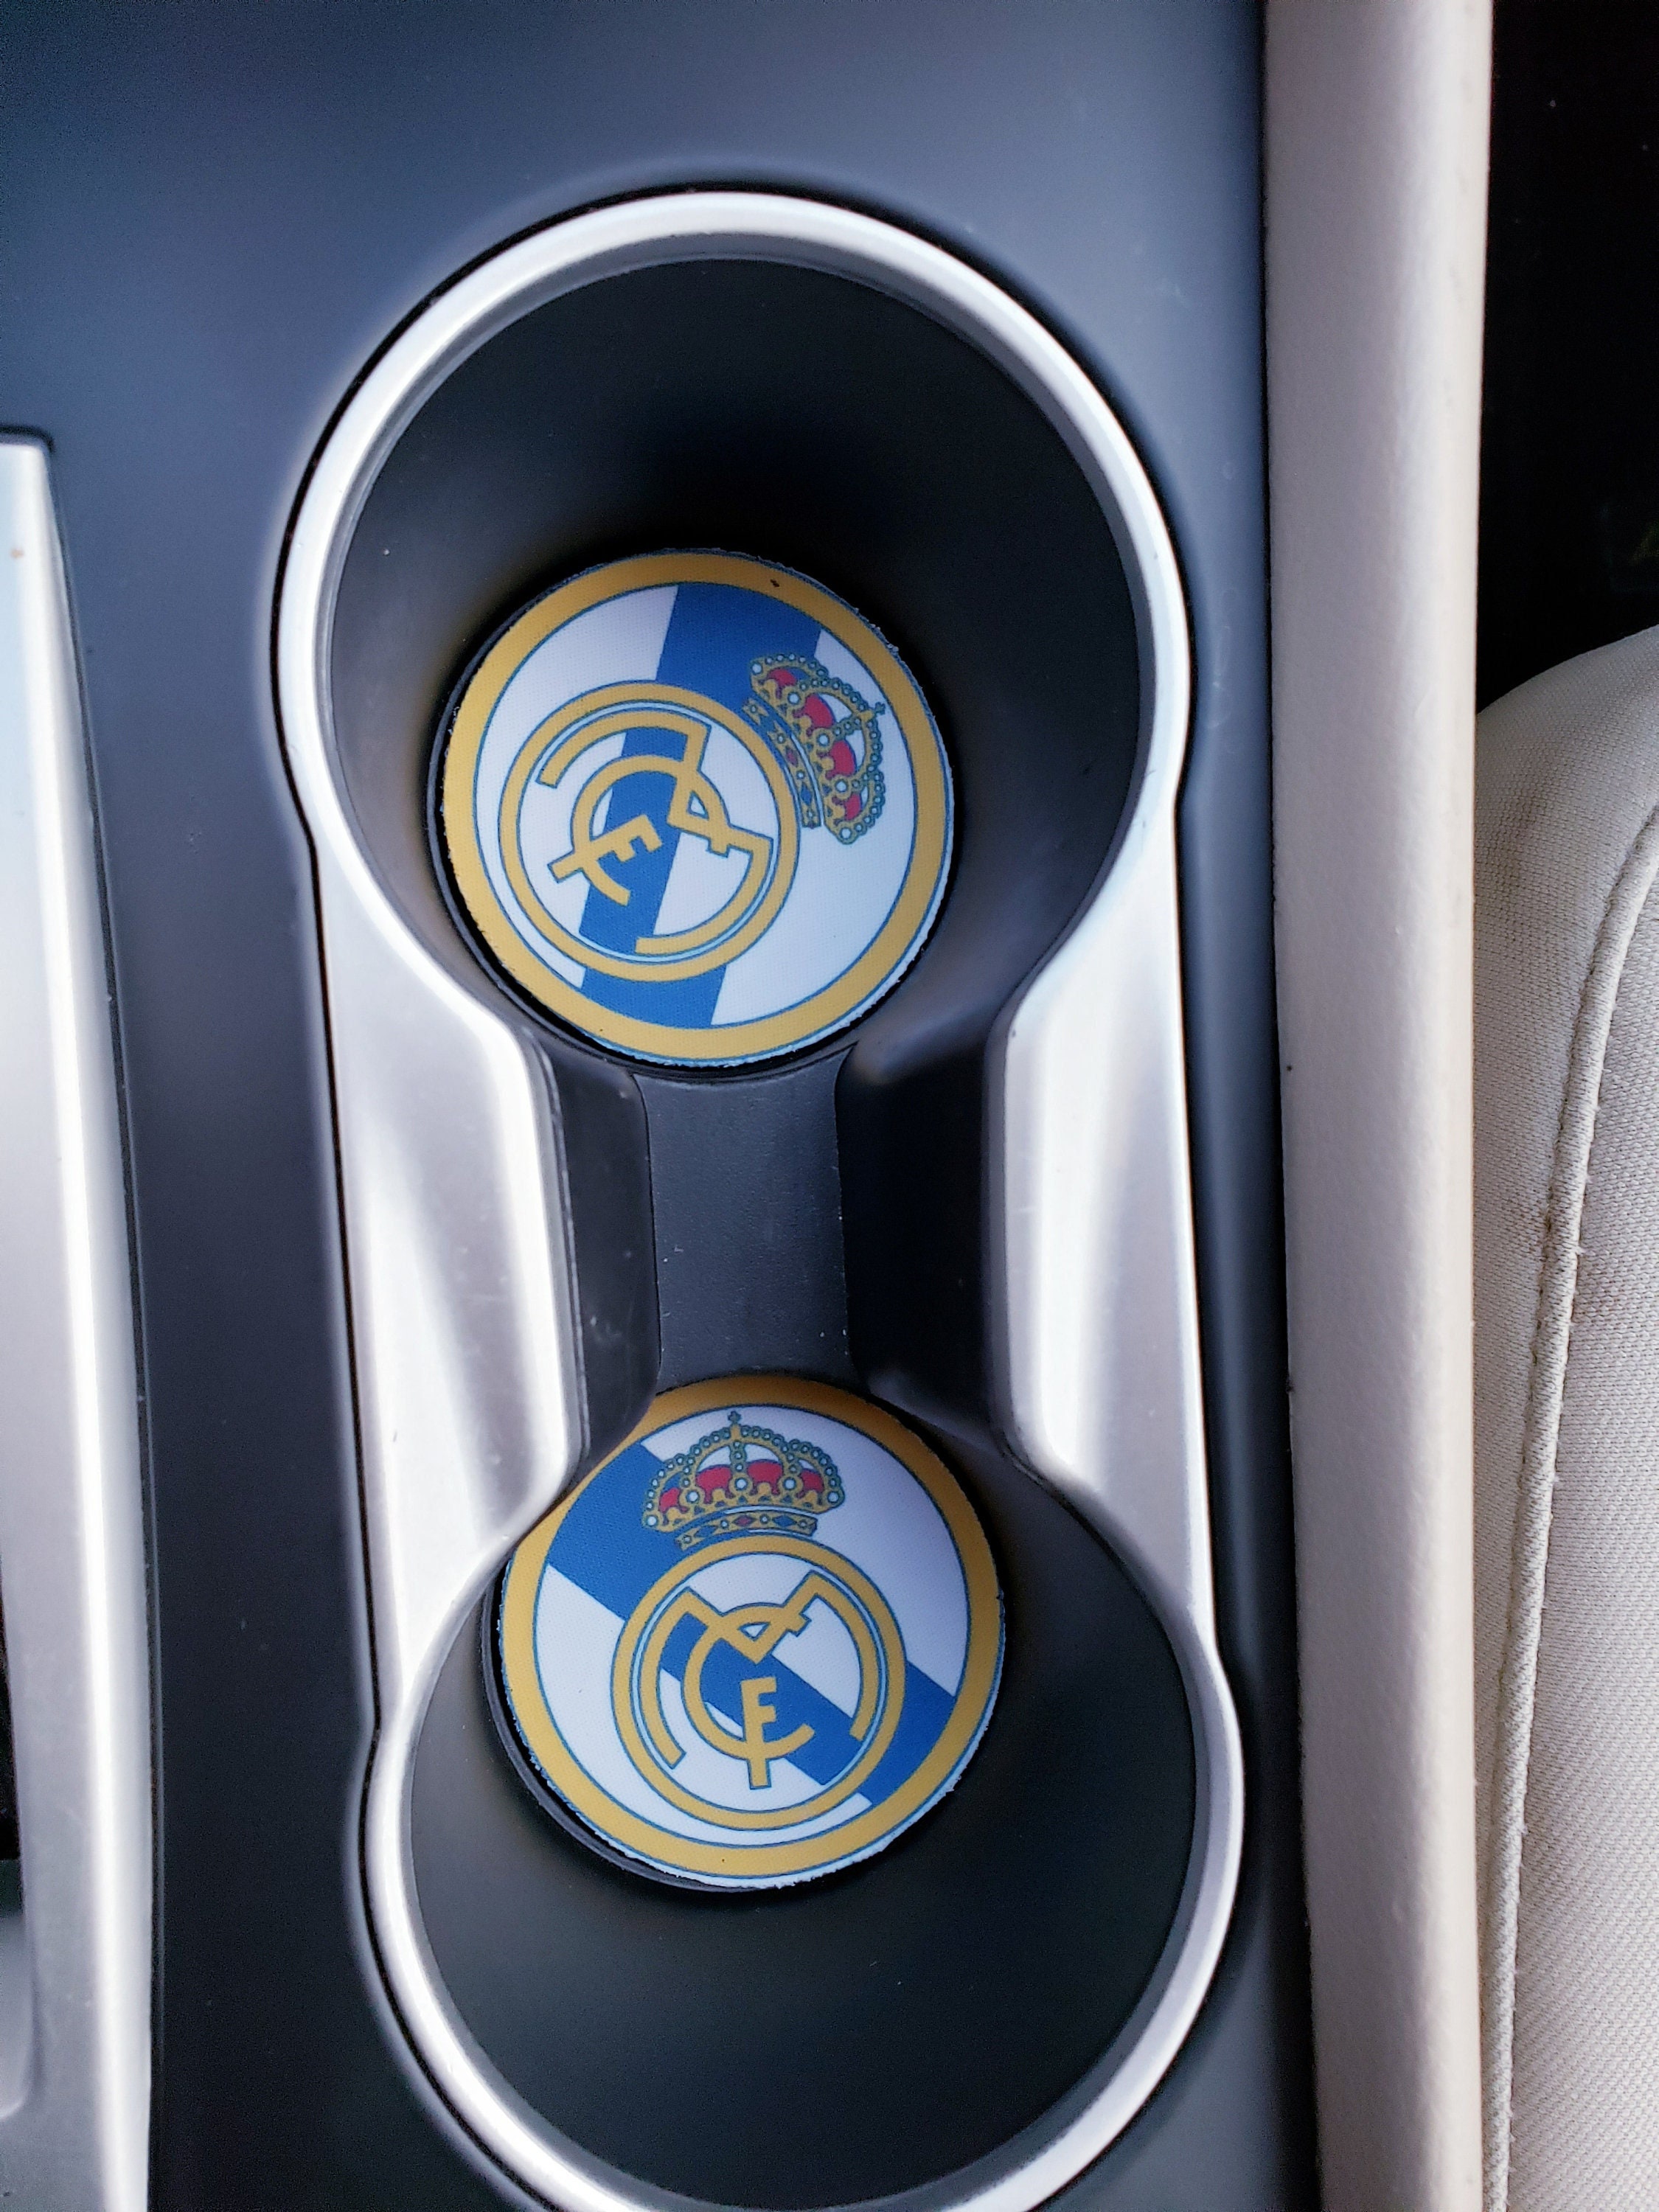 Real Madrid, Car Accessories, Car Decor, Car Coasters,Coaster, auto decor,  gift for him, cup holder coaster, personalized coaster